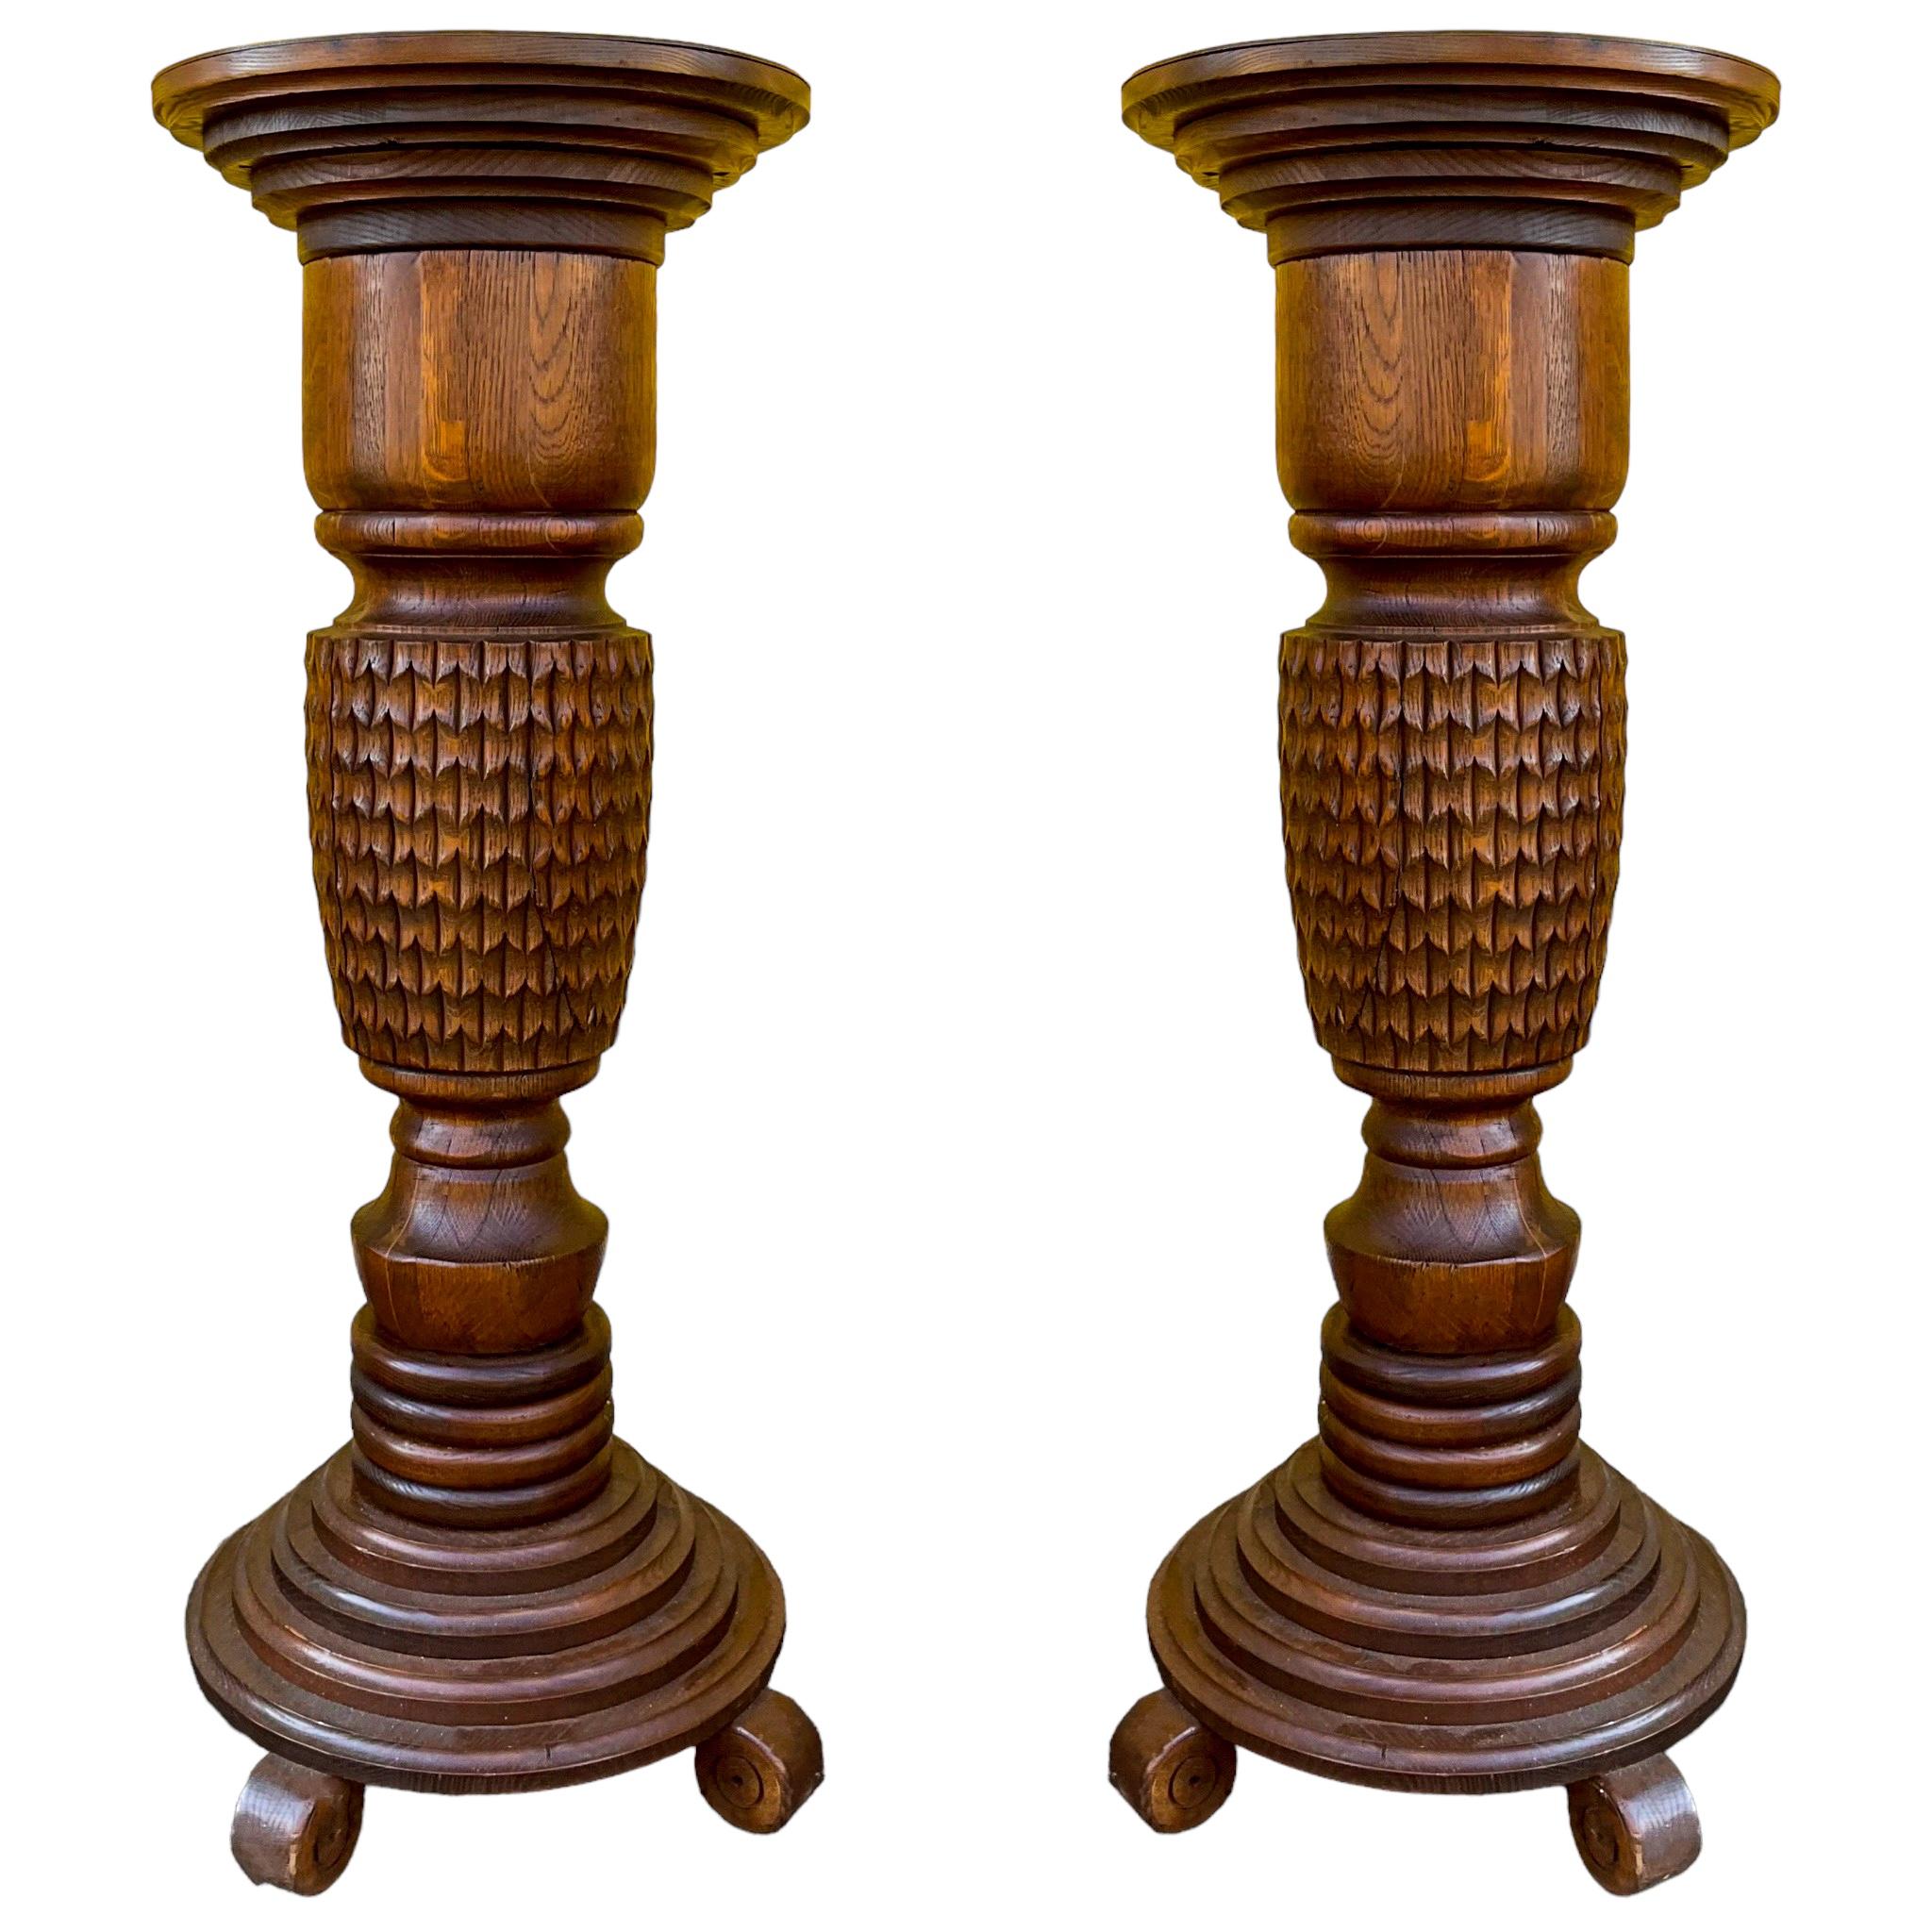 20th Century Early 20th-C. British Colonial Style Carved Oak Pineapple Form Pedestals -Pair For Sale